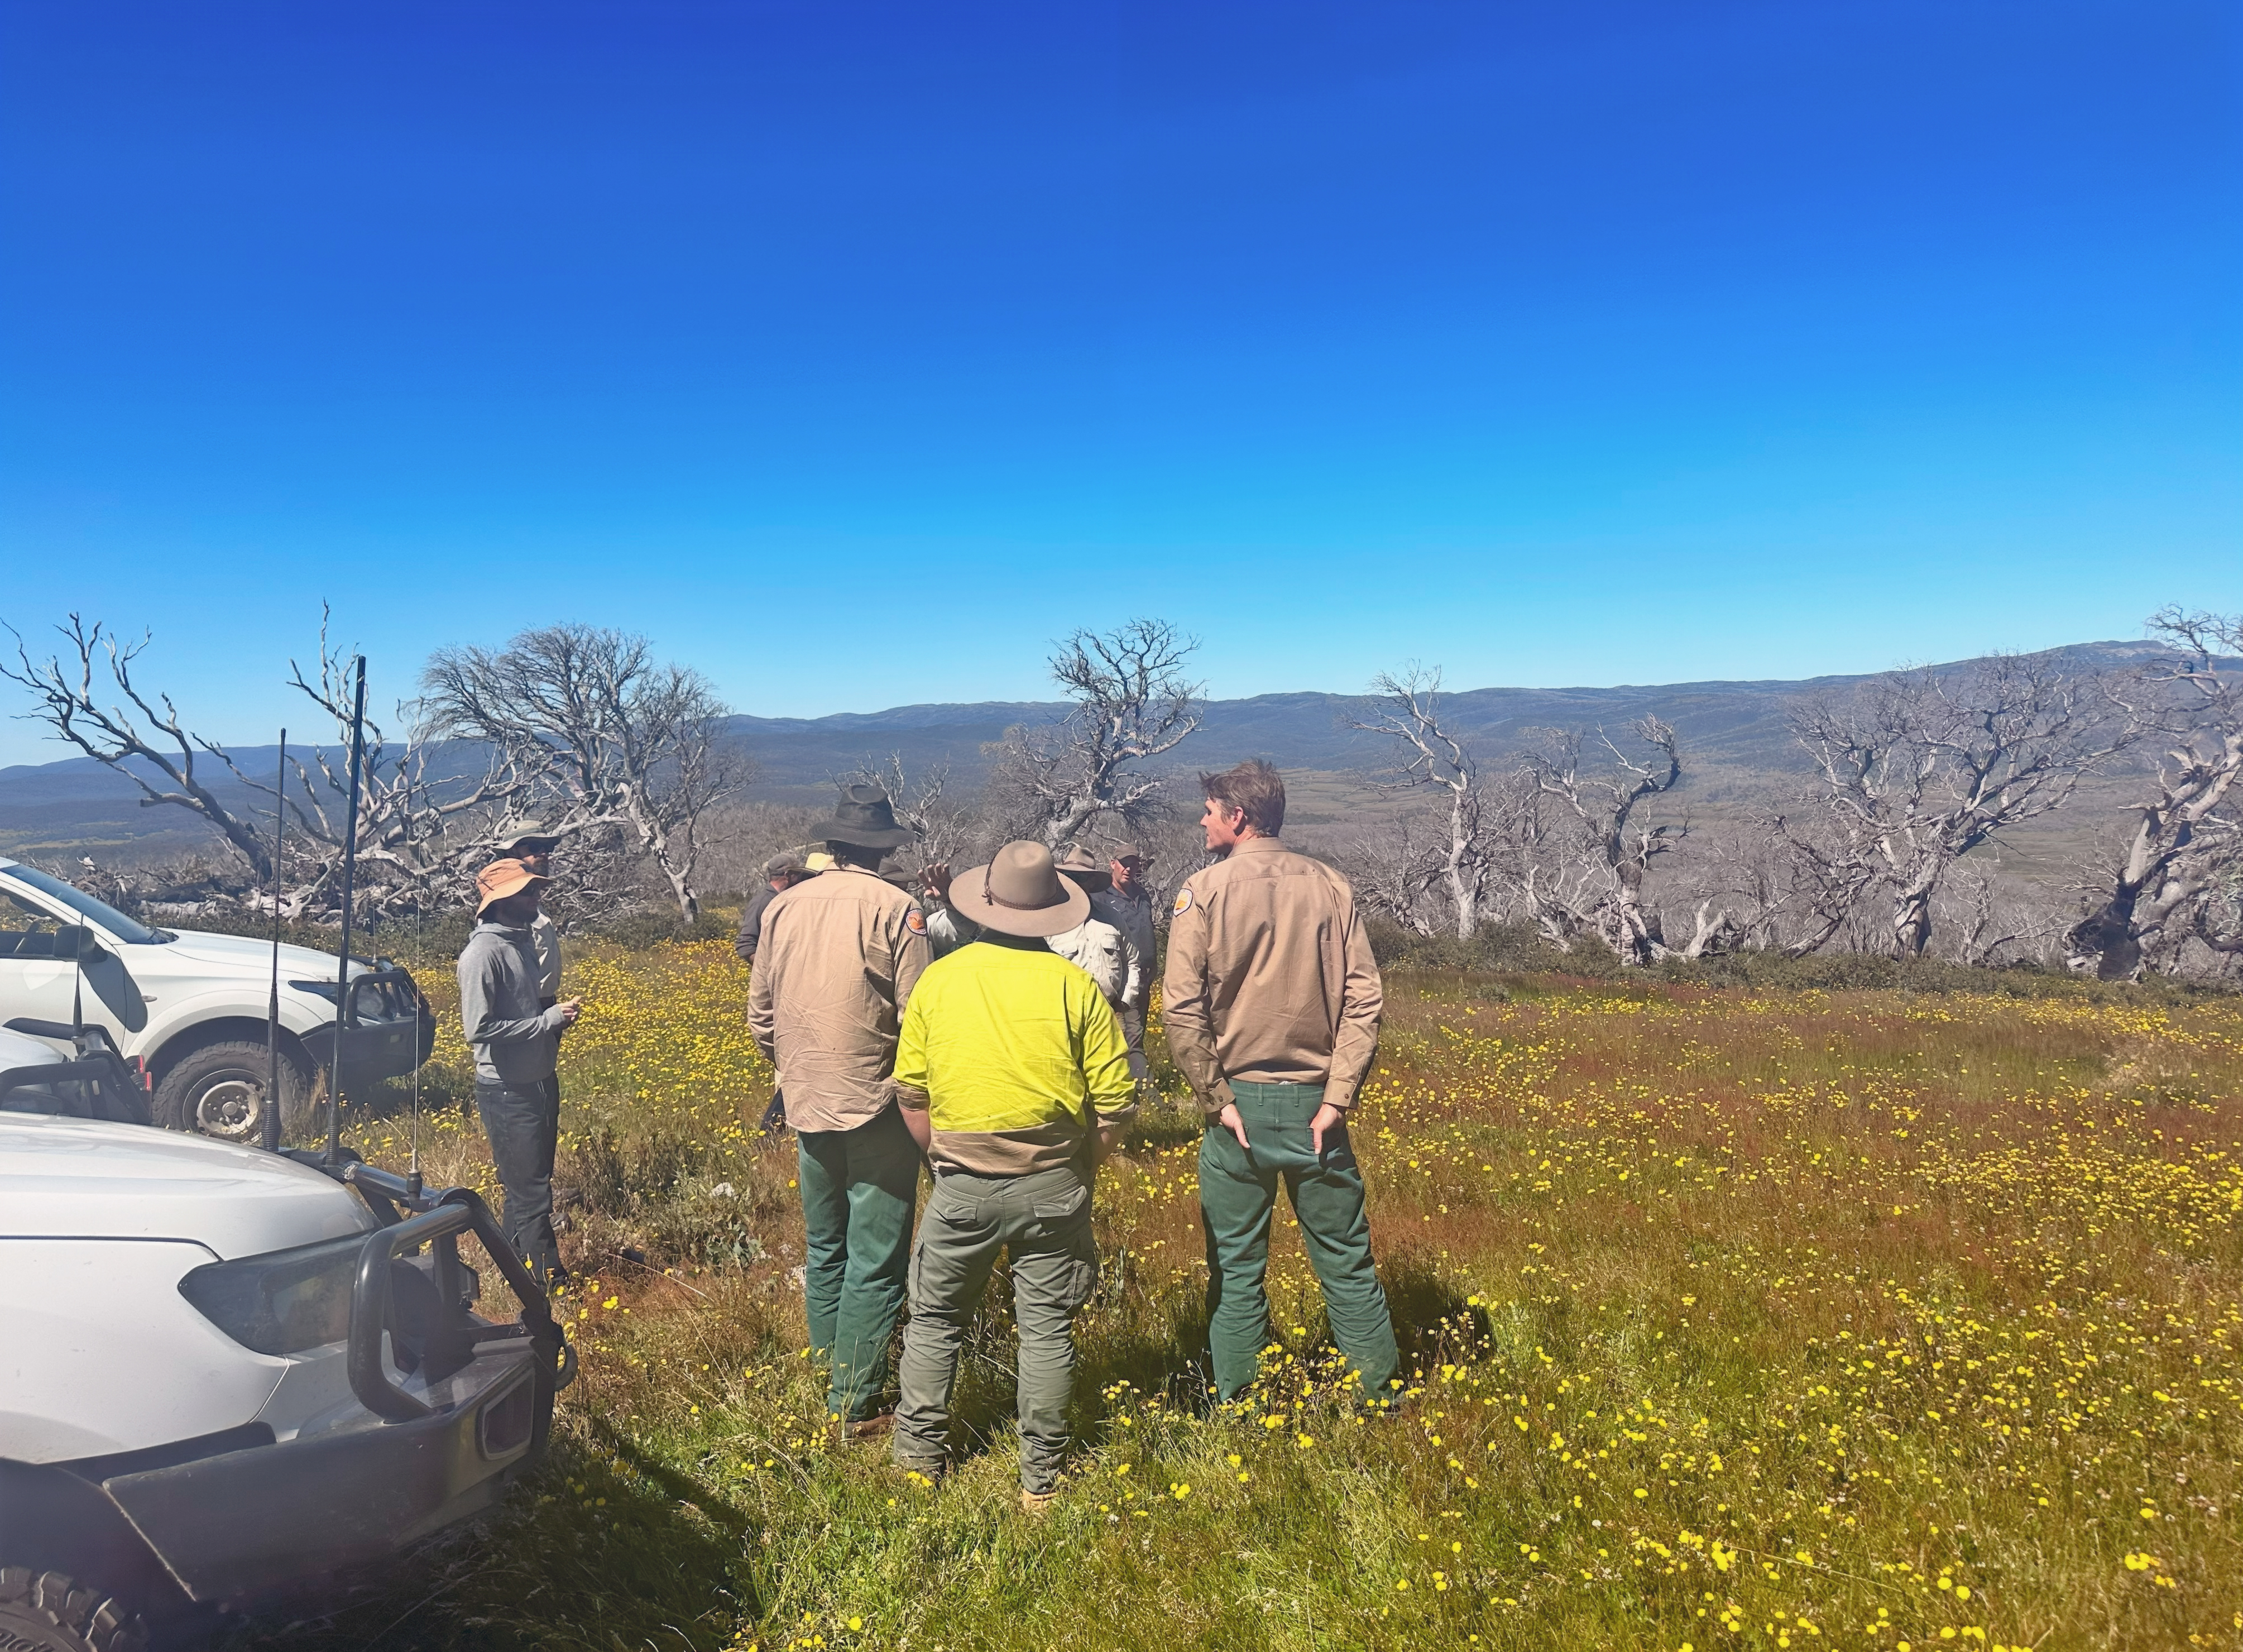 Attendees from ACT and NSW Parks services at Council's education session stand in a flowering alpine field, backs to the camera, with mountains and burned trees in the distance.